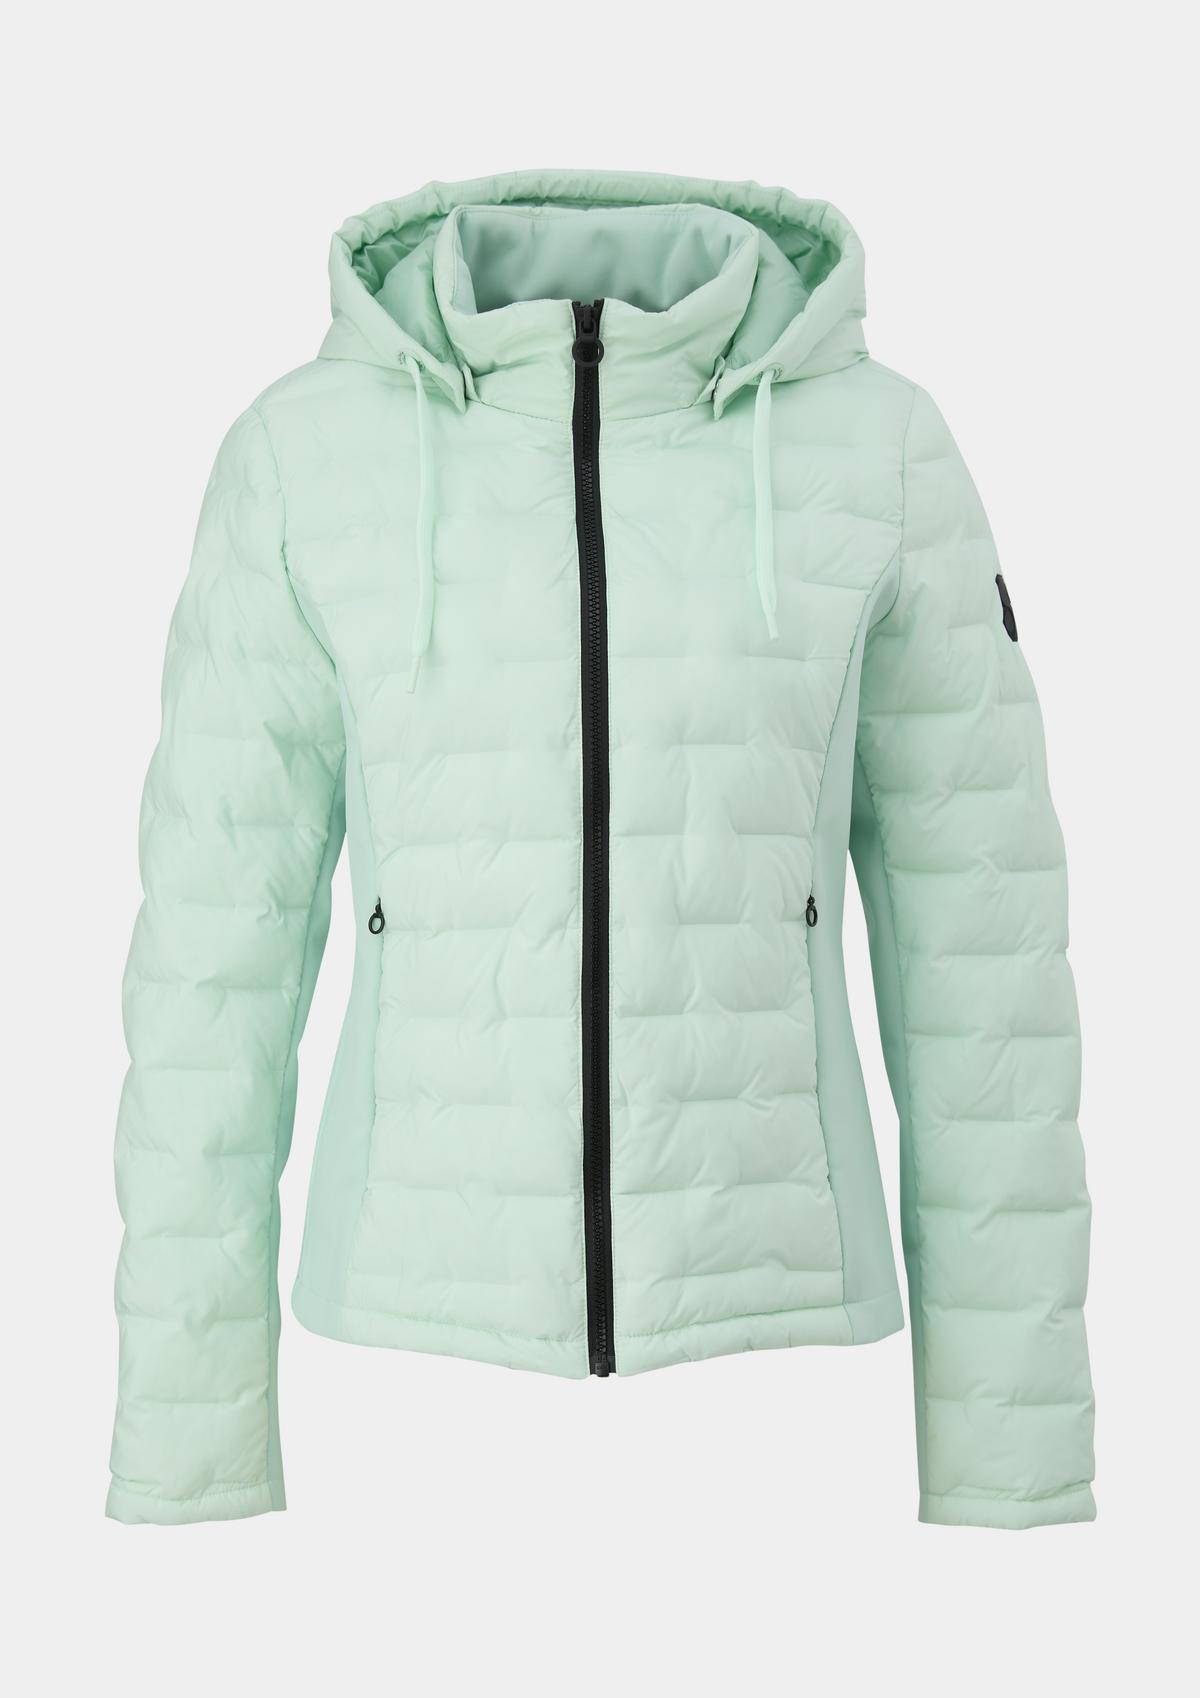 of outdoor in jacket materials - a Padded mix offwhite